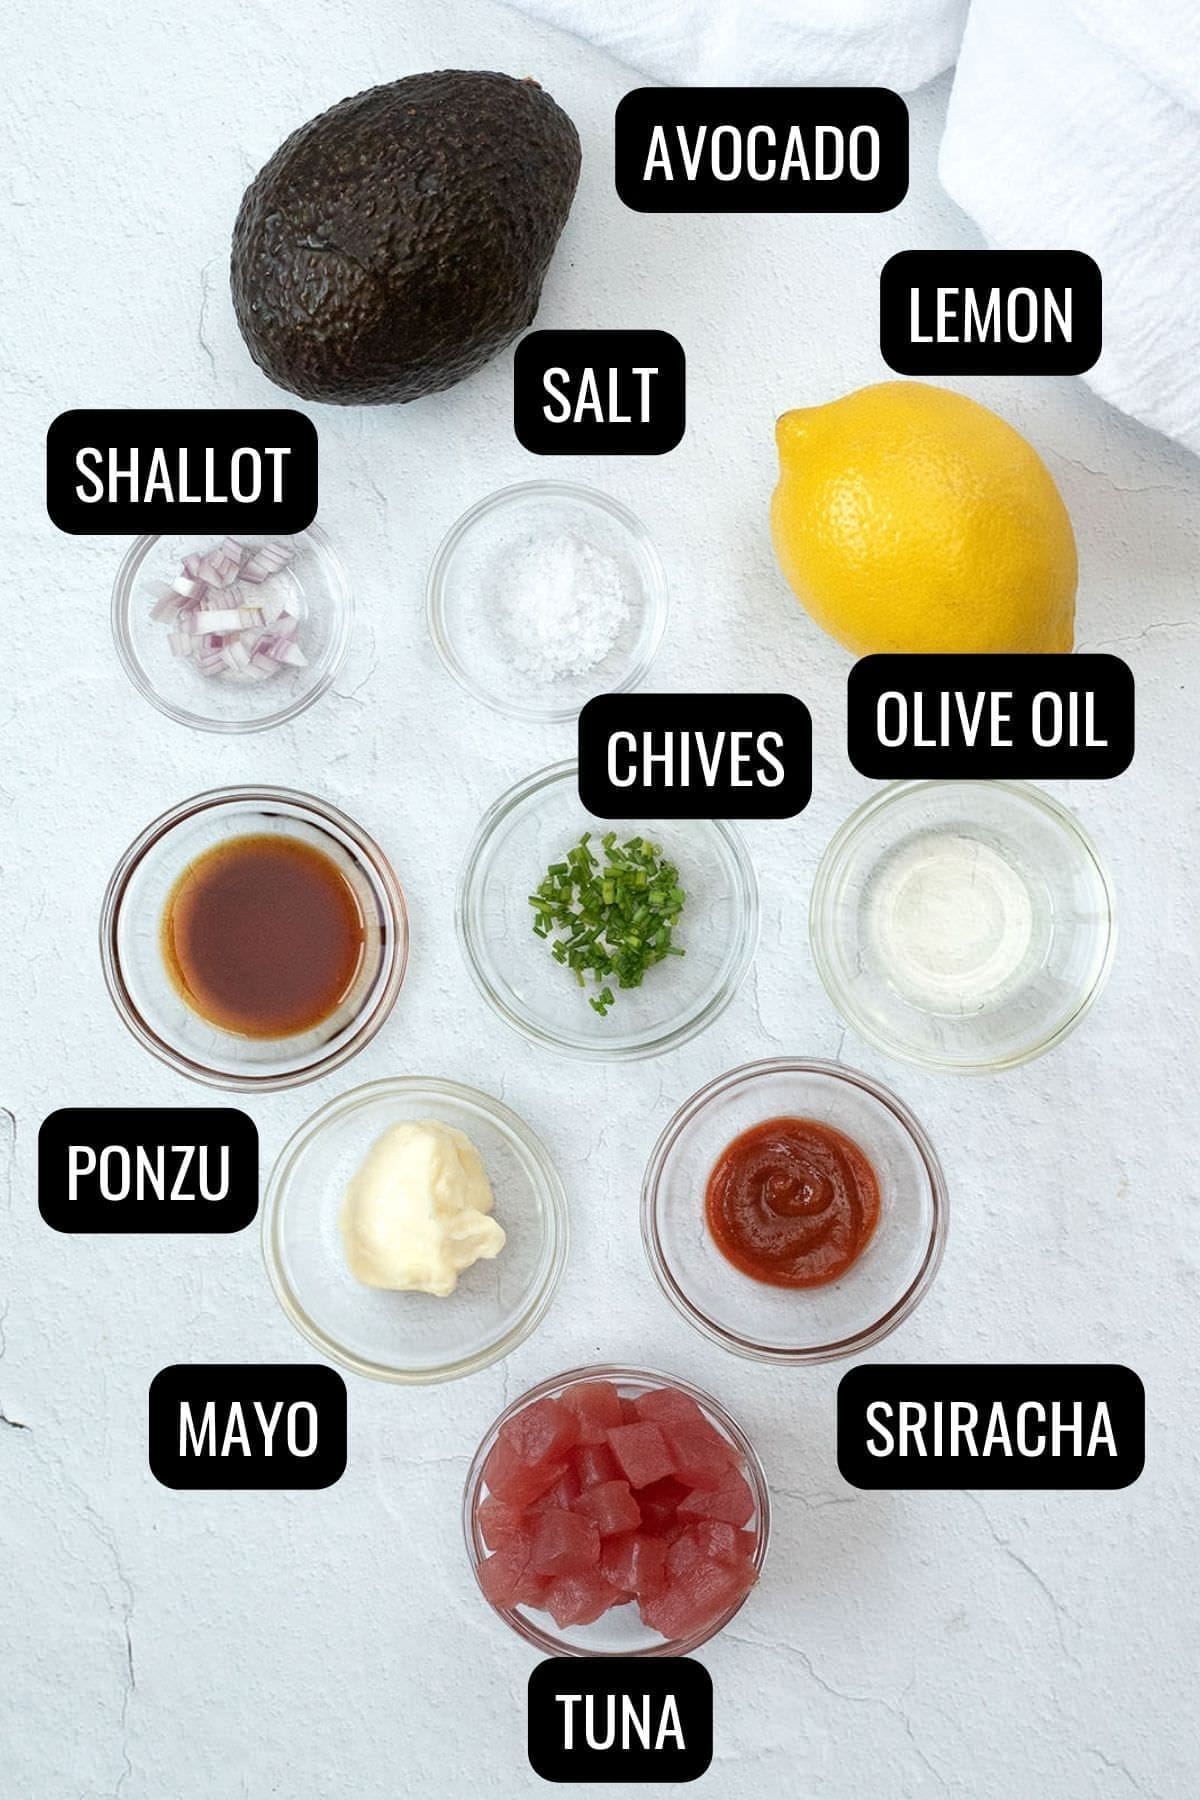 labeled photo showing the ingredients to make tartare.